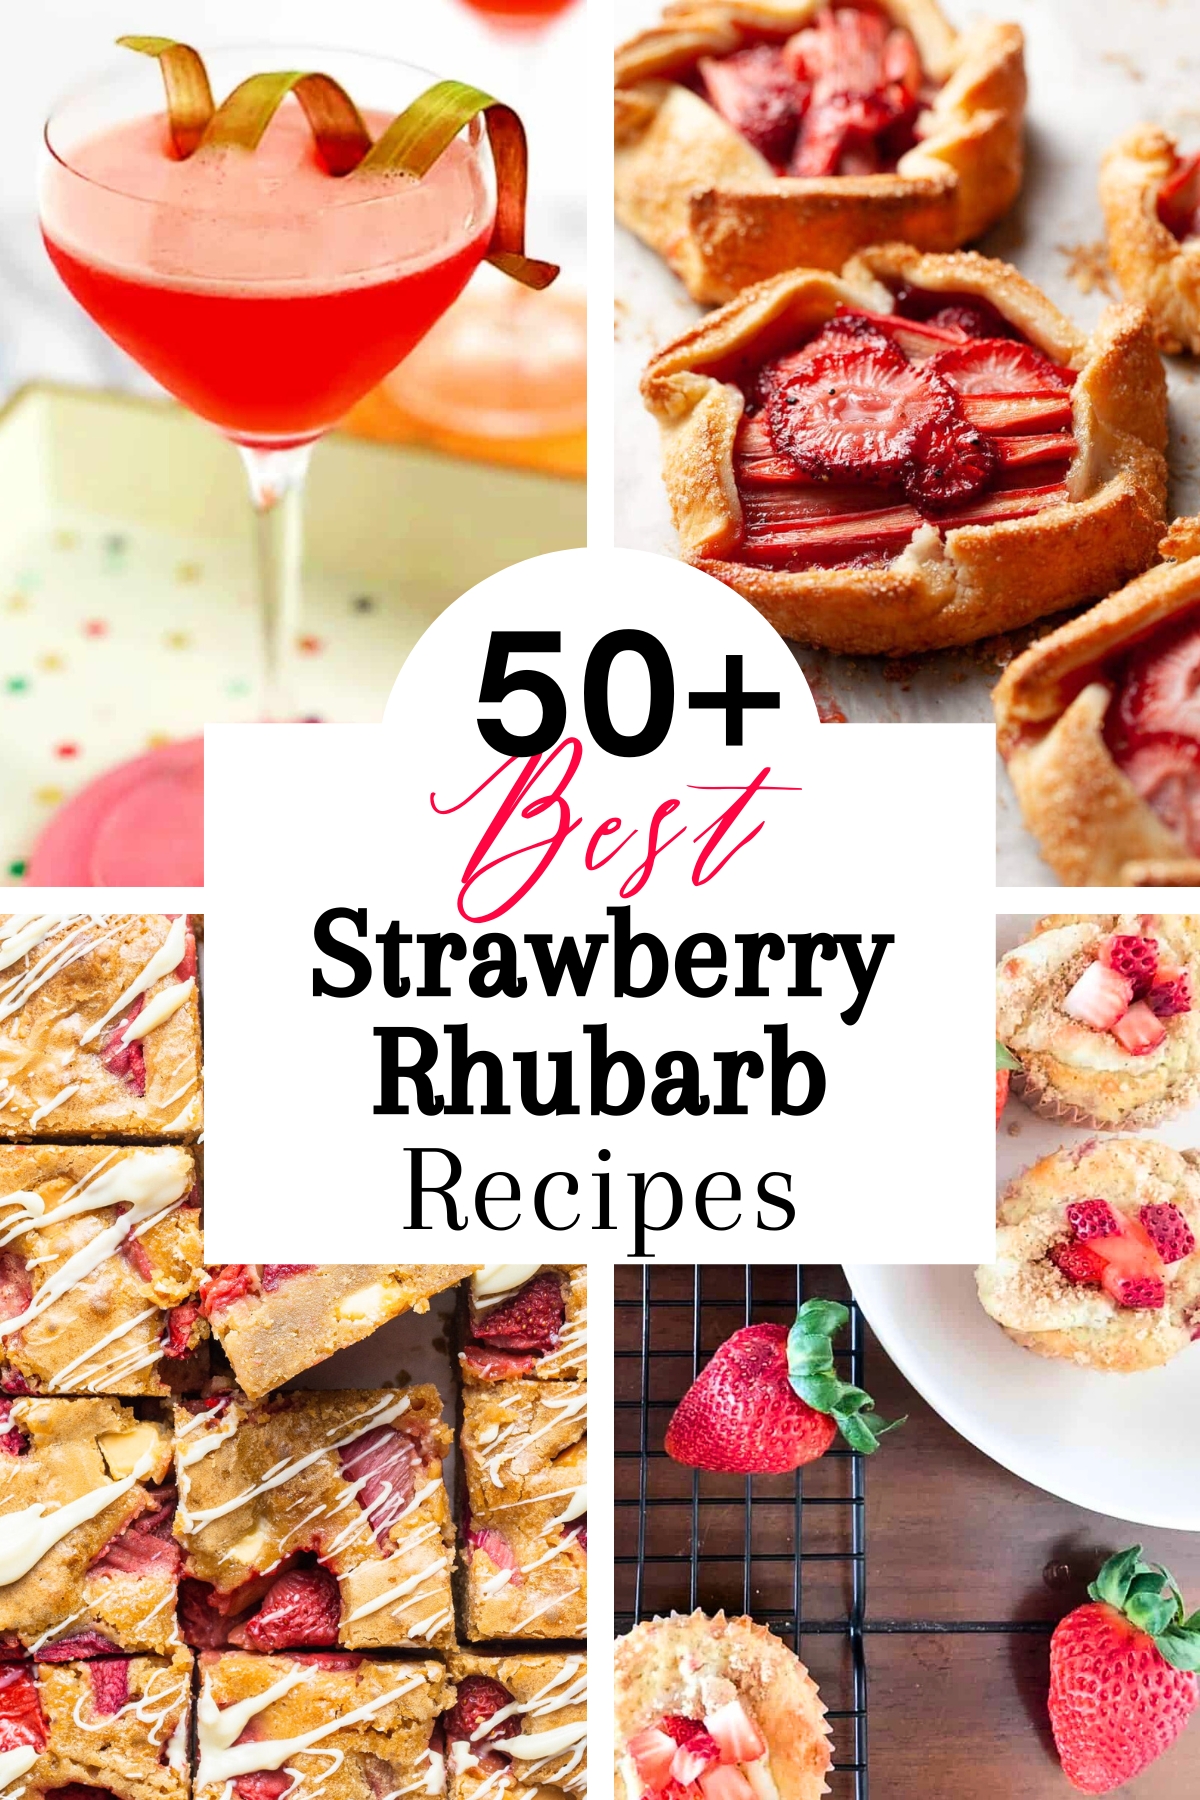 Collage of 4 strawberry rhubarb recipes including a bright pink drink in a martini glass with a twist of rhubarb, open faced individual tarts, muffins with scattered strawberries beside and bars flecked with pink and drizzled with white icing.